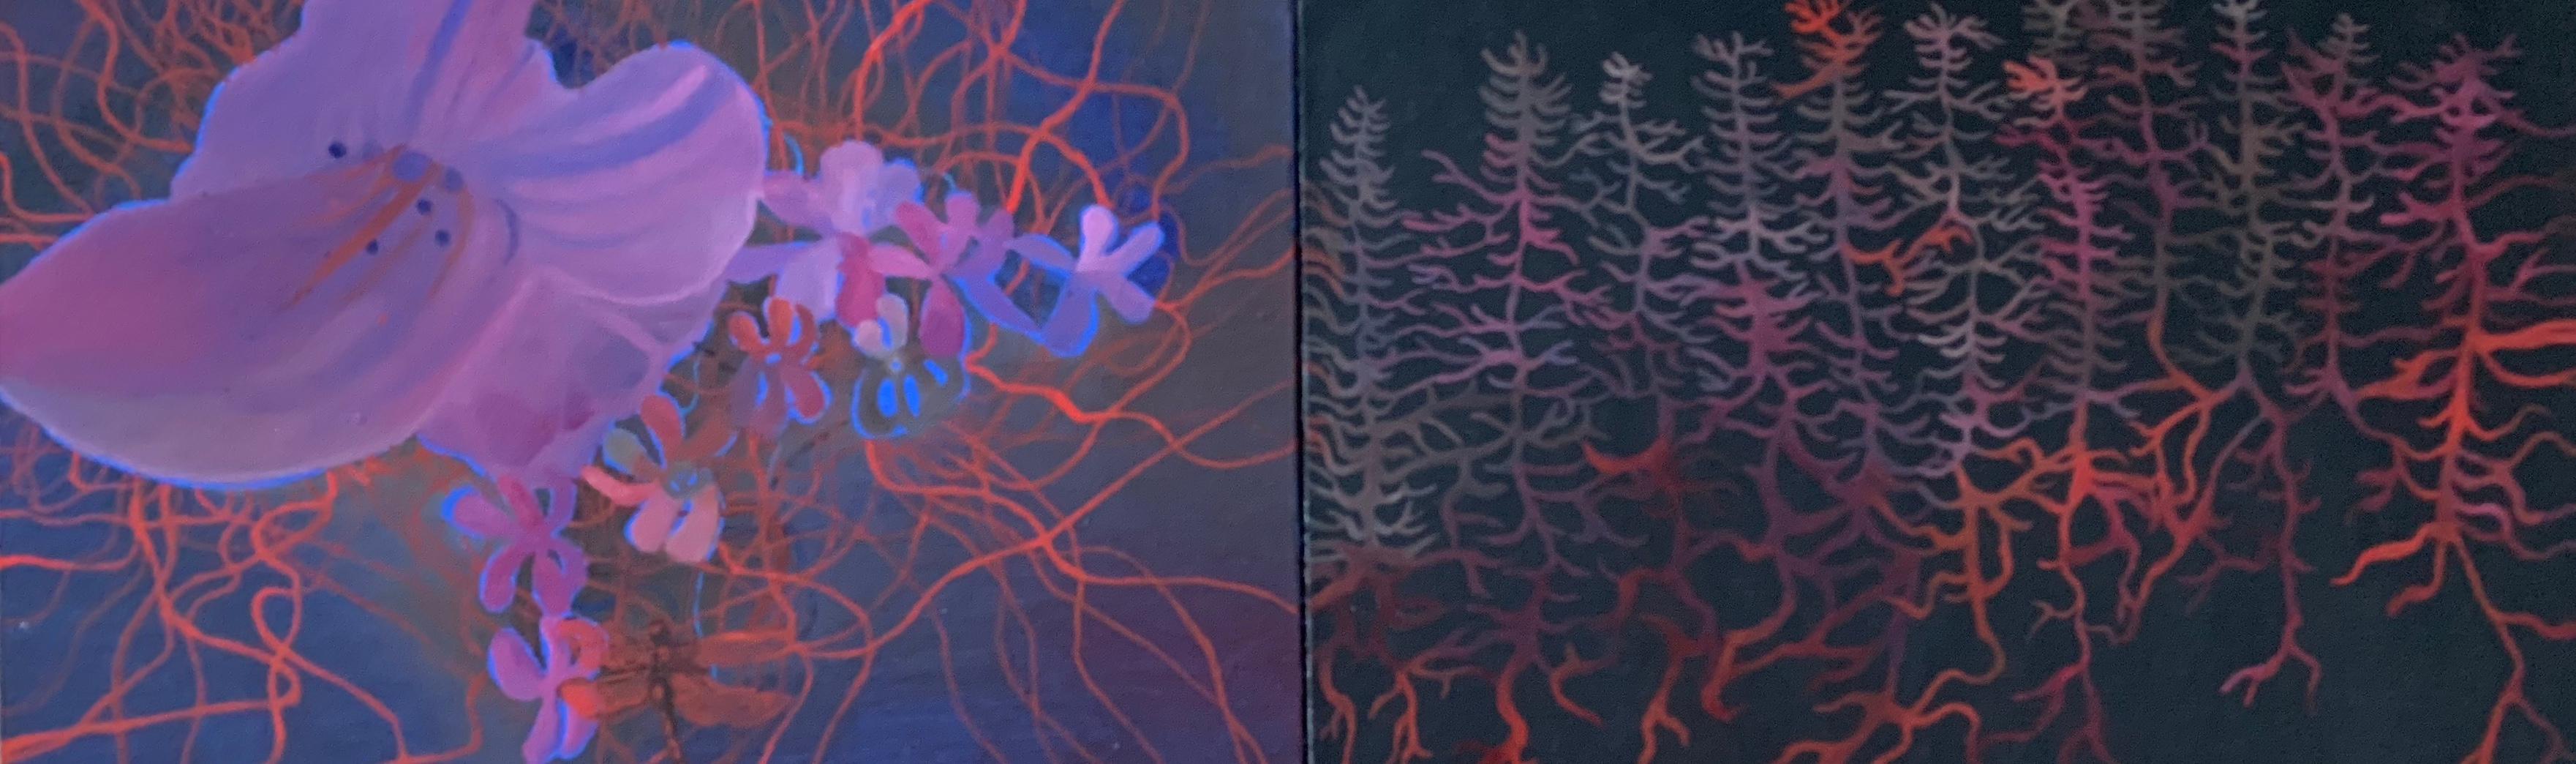 Underwater Plants - Diptych, Contemporary Nature Oil Painting, Magical Realism